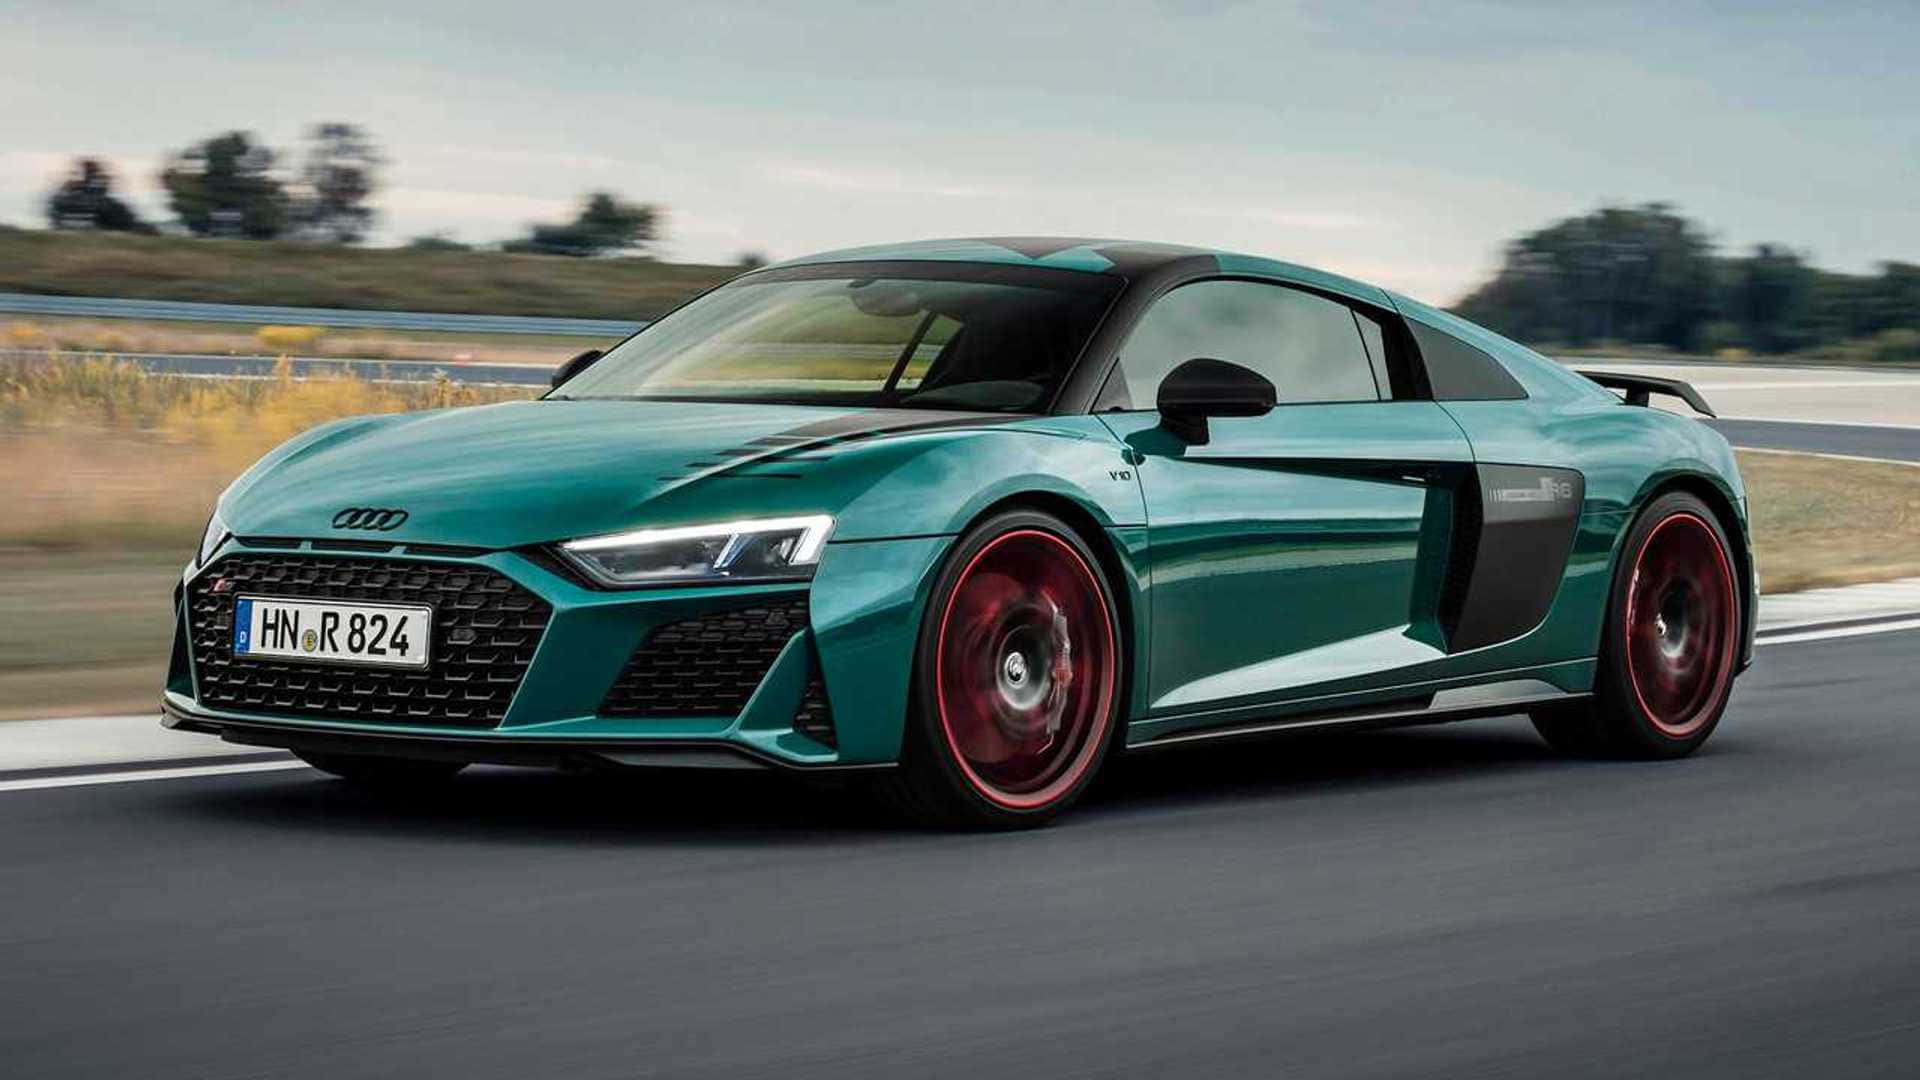 See the beauty of the Audi R8!